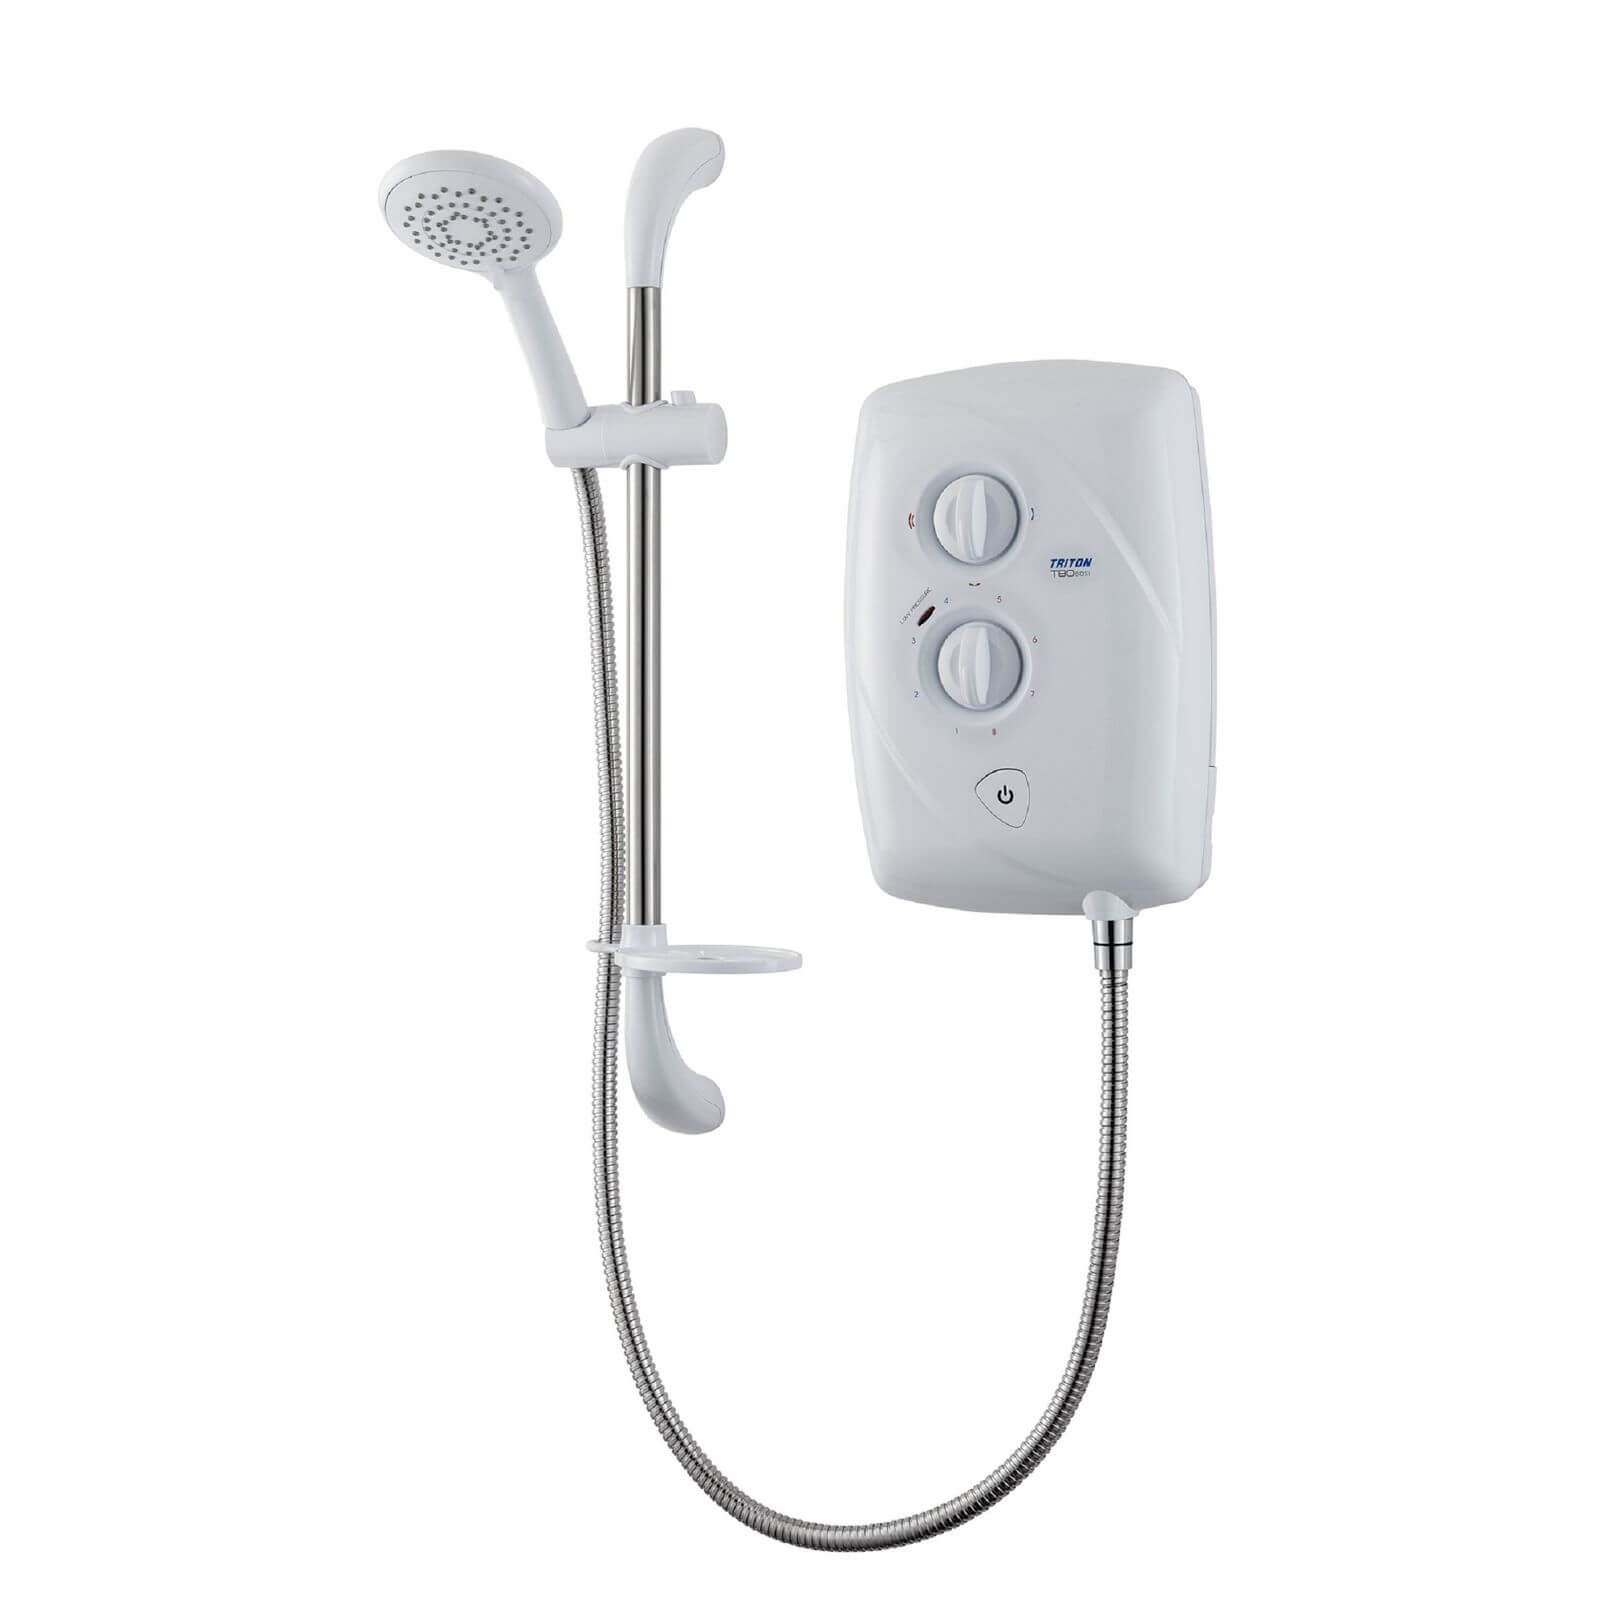 Photo of Triton T80easi-fit 10.5kw Electric Shower - White